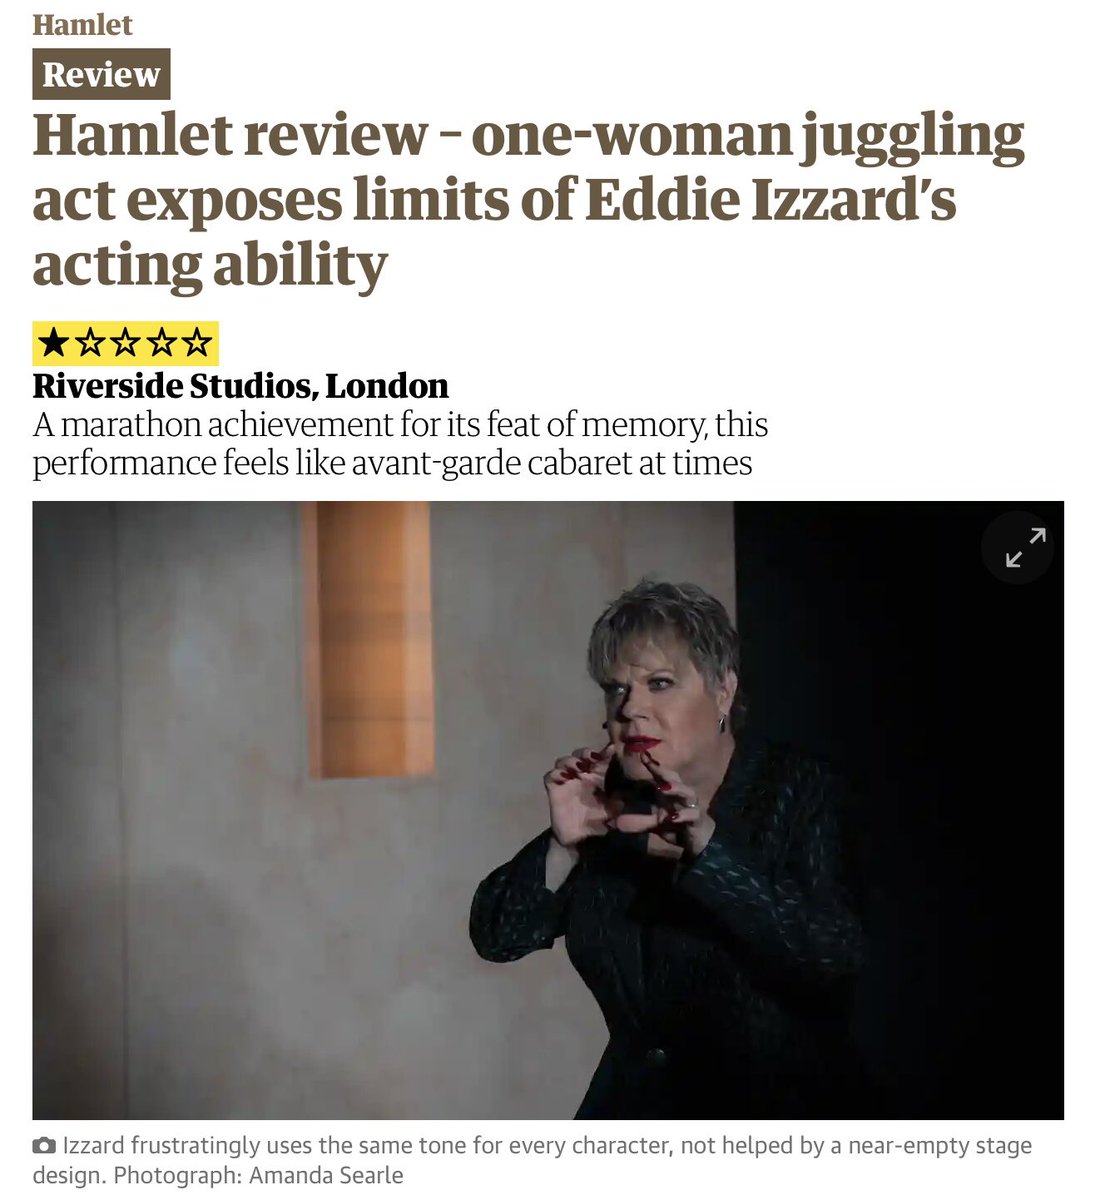 Even when writing a merciless one-star stinker, the Guardian feels the need to abase itself and pander to Eddie Izzard’s narcissistic fantasy. (And no, it’s not just the headline: the same phrase is in the first paragraph)